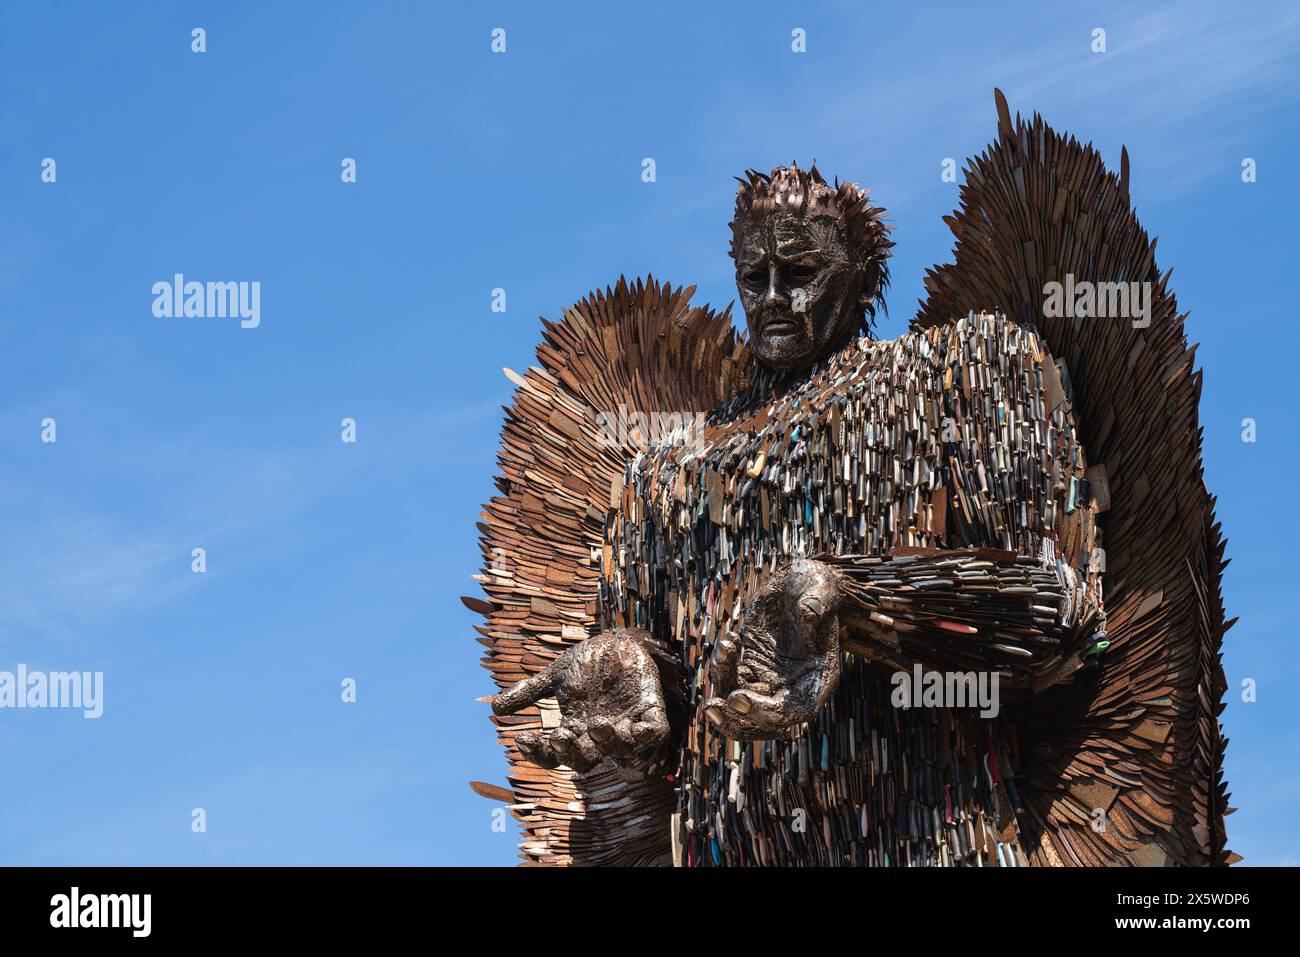 The Knife Angel, a sculpture created by artist Alfie Bradley and formed of 100,000 knives, on display in Weston-super-Mare, North Somerset. Also know as the National Monument Against Violence & Aggression, the angel was created to highlight knife crime in the UK. Stock Photo